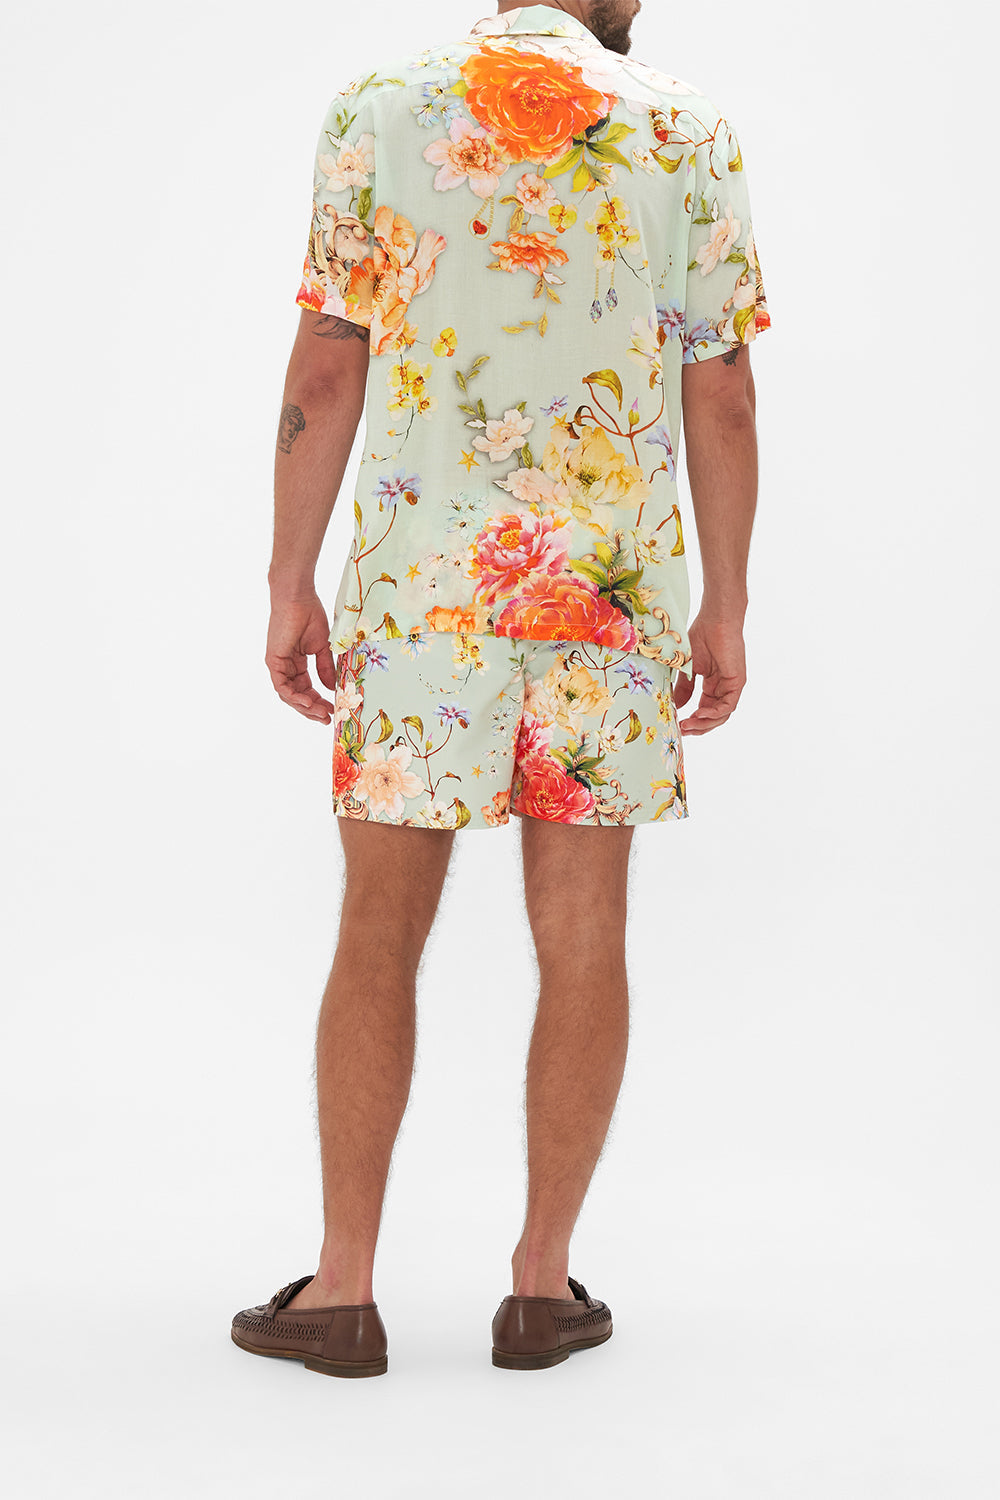 Back view of model wearing Hotel Franks by CAMILLA mens floral short sleeved camp collared shirt in Talk The Walk print